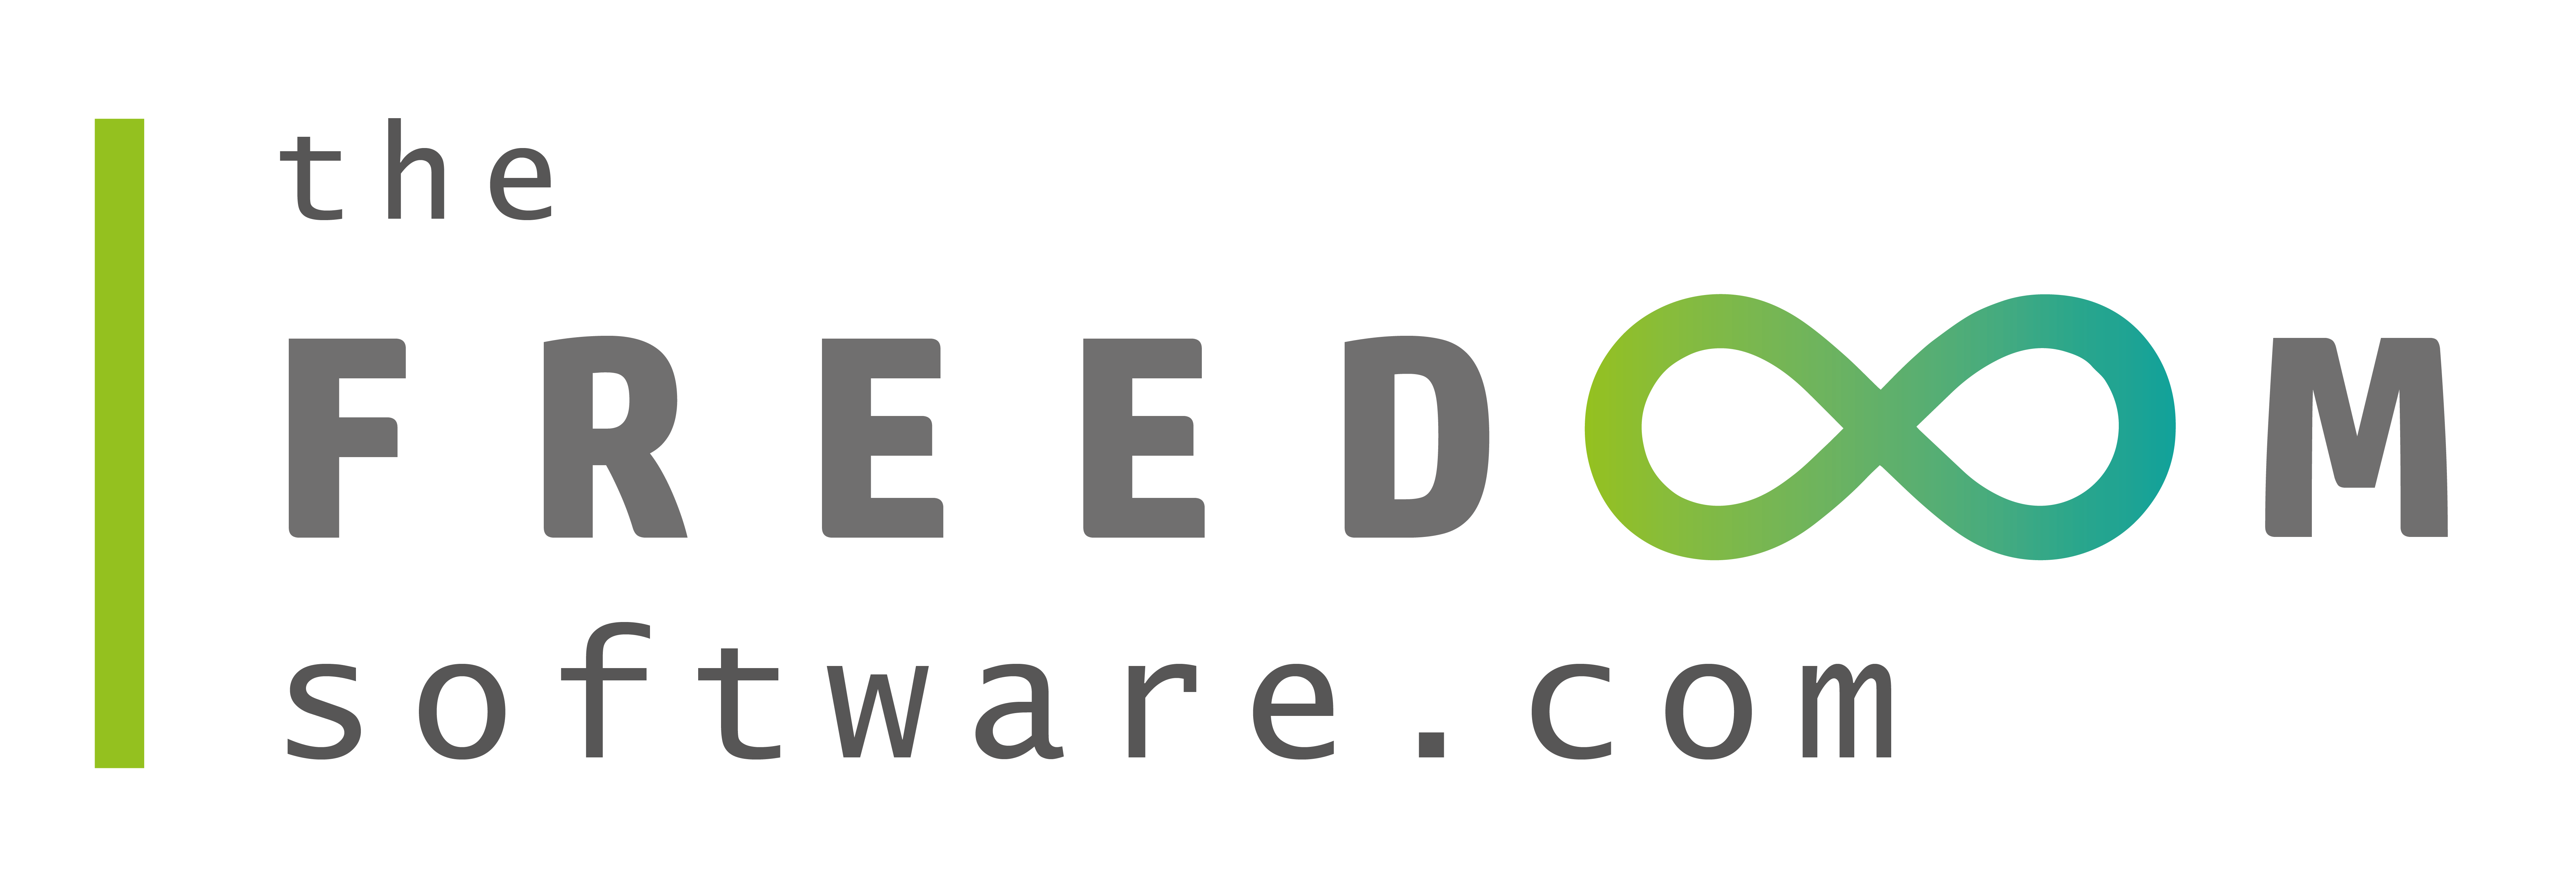 The freedom software logo